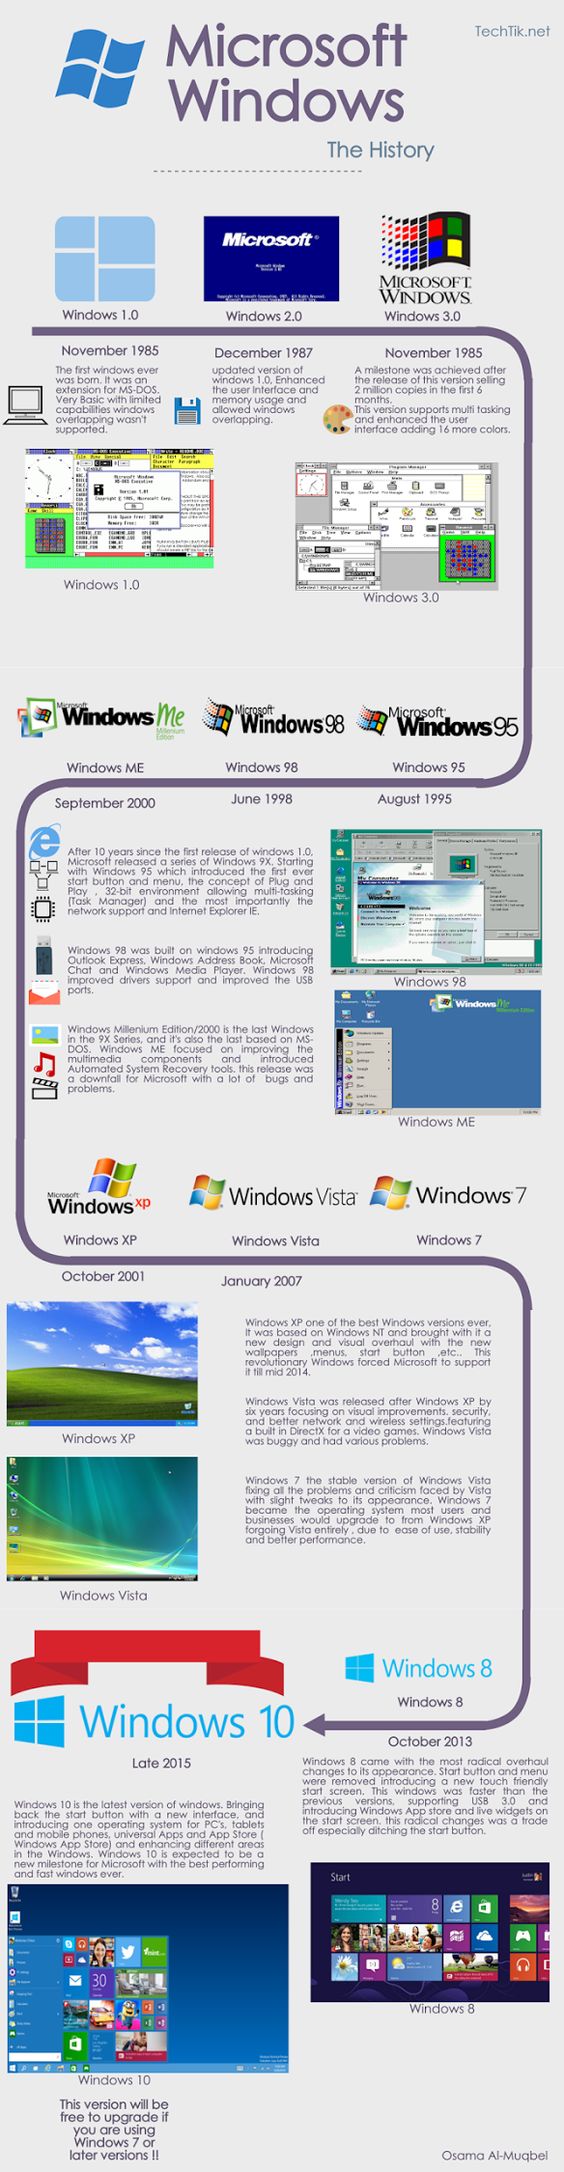 All About Technology : Microsoft Windows:The History From Windows 1 to Windows 10 Info-graphic